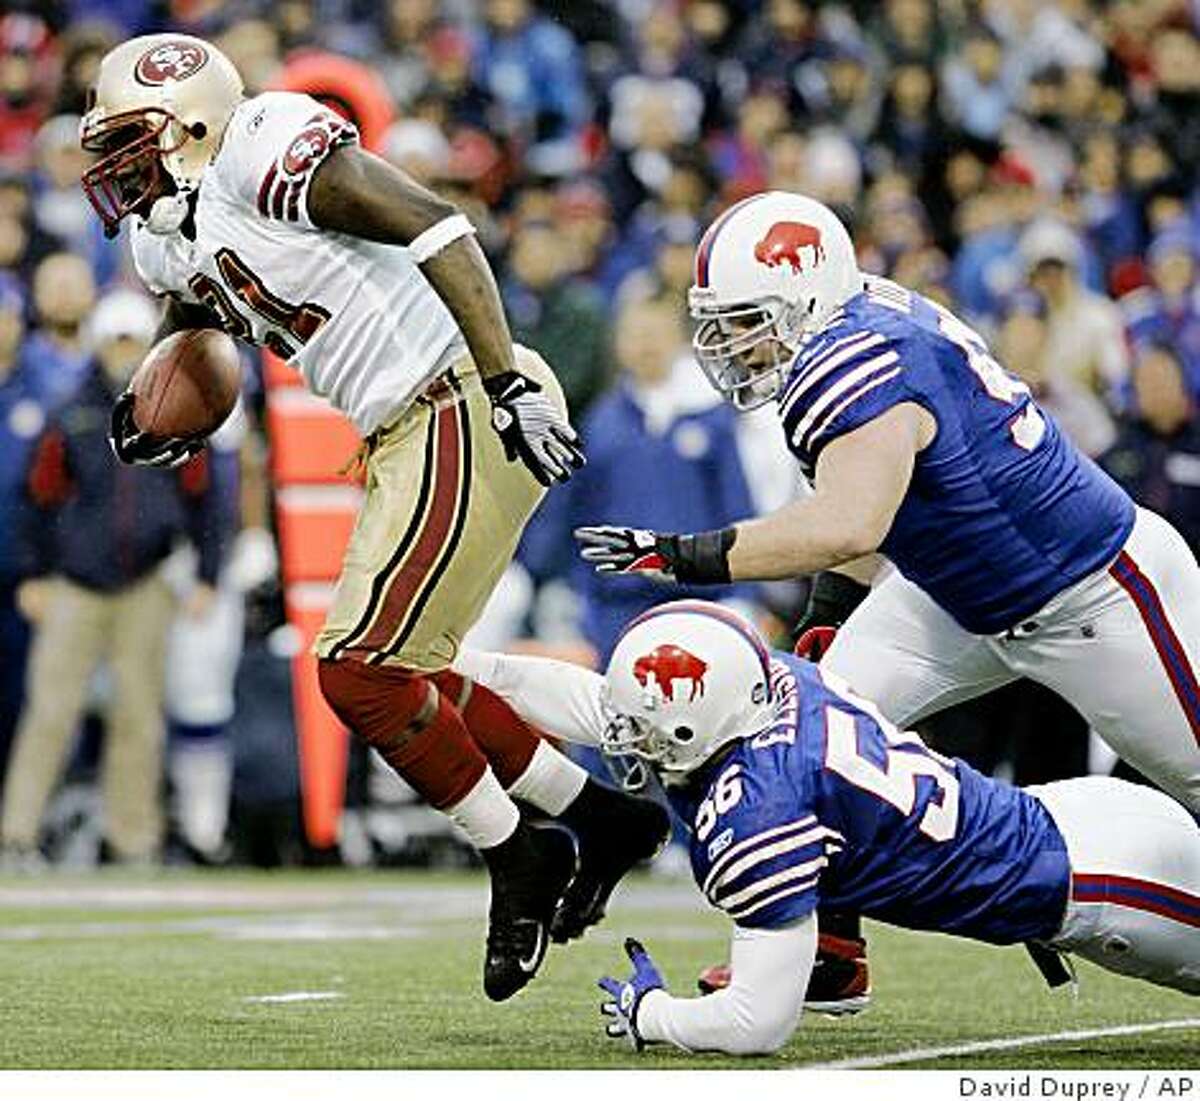 San Francisco 49ers' Frank Gore (21) runs under pressure from Buffalo Bills' Kyle Williams, right, and Keith Ellison (56) during the first half of the NFL football game at Ralph Wilson Stadium in Orchard Park, N.Y., Sunday, Nov. 30, 2008. (AP Photo/David Duprey)